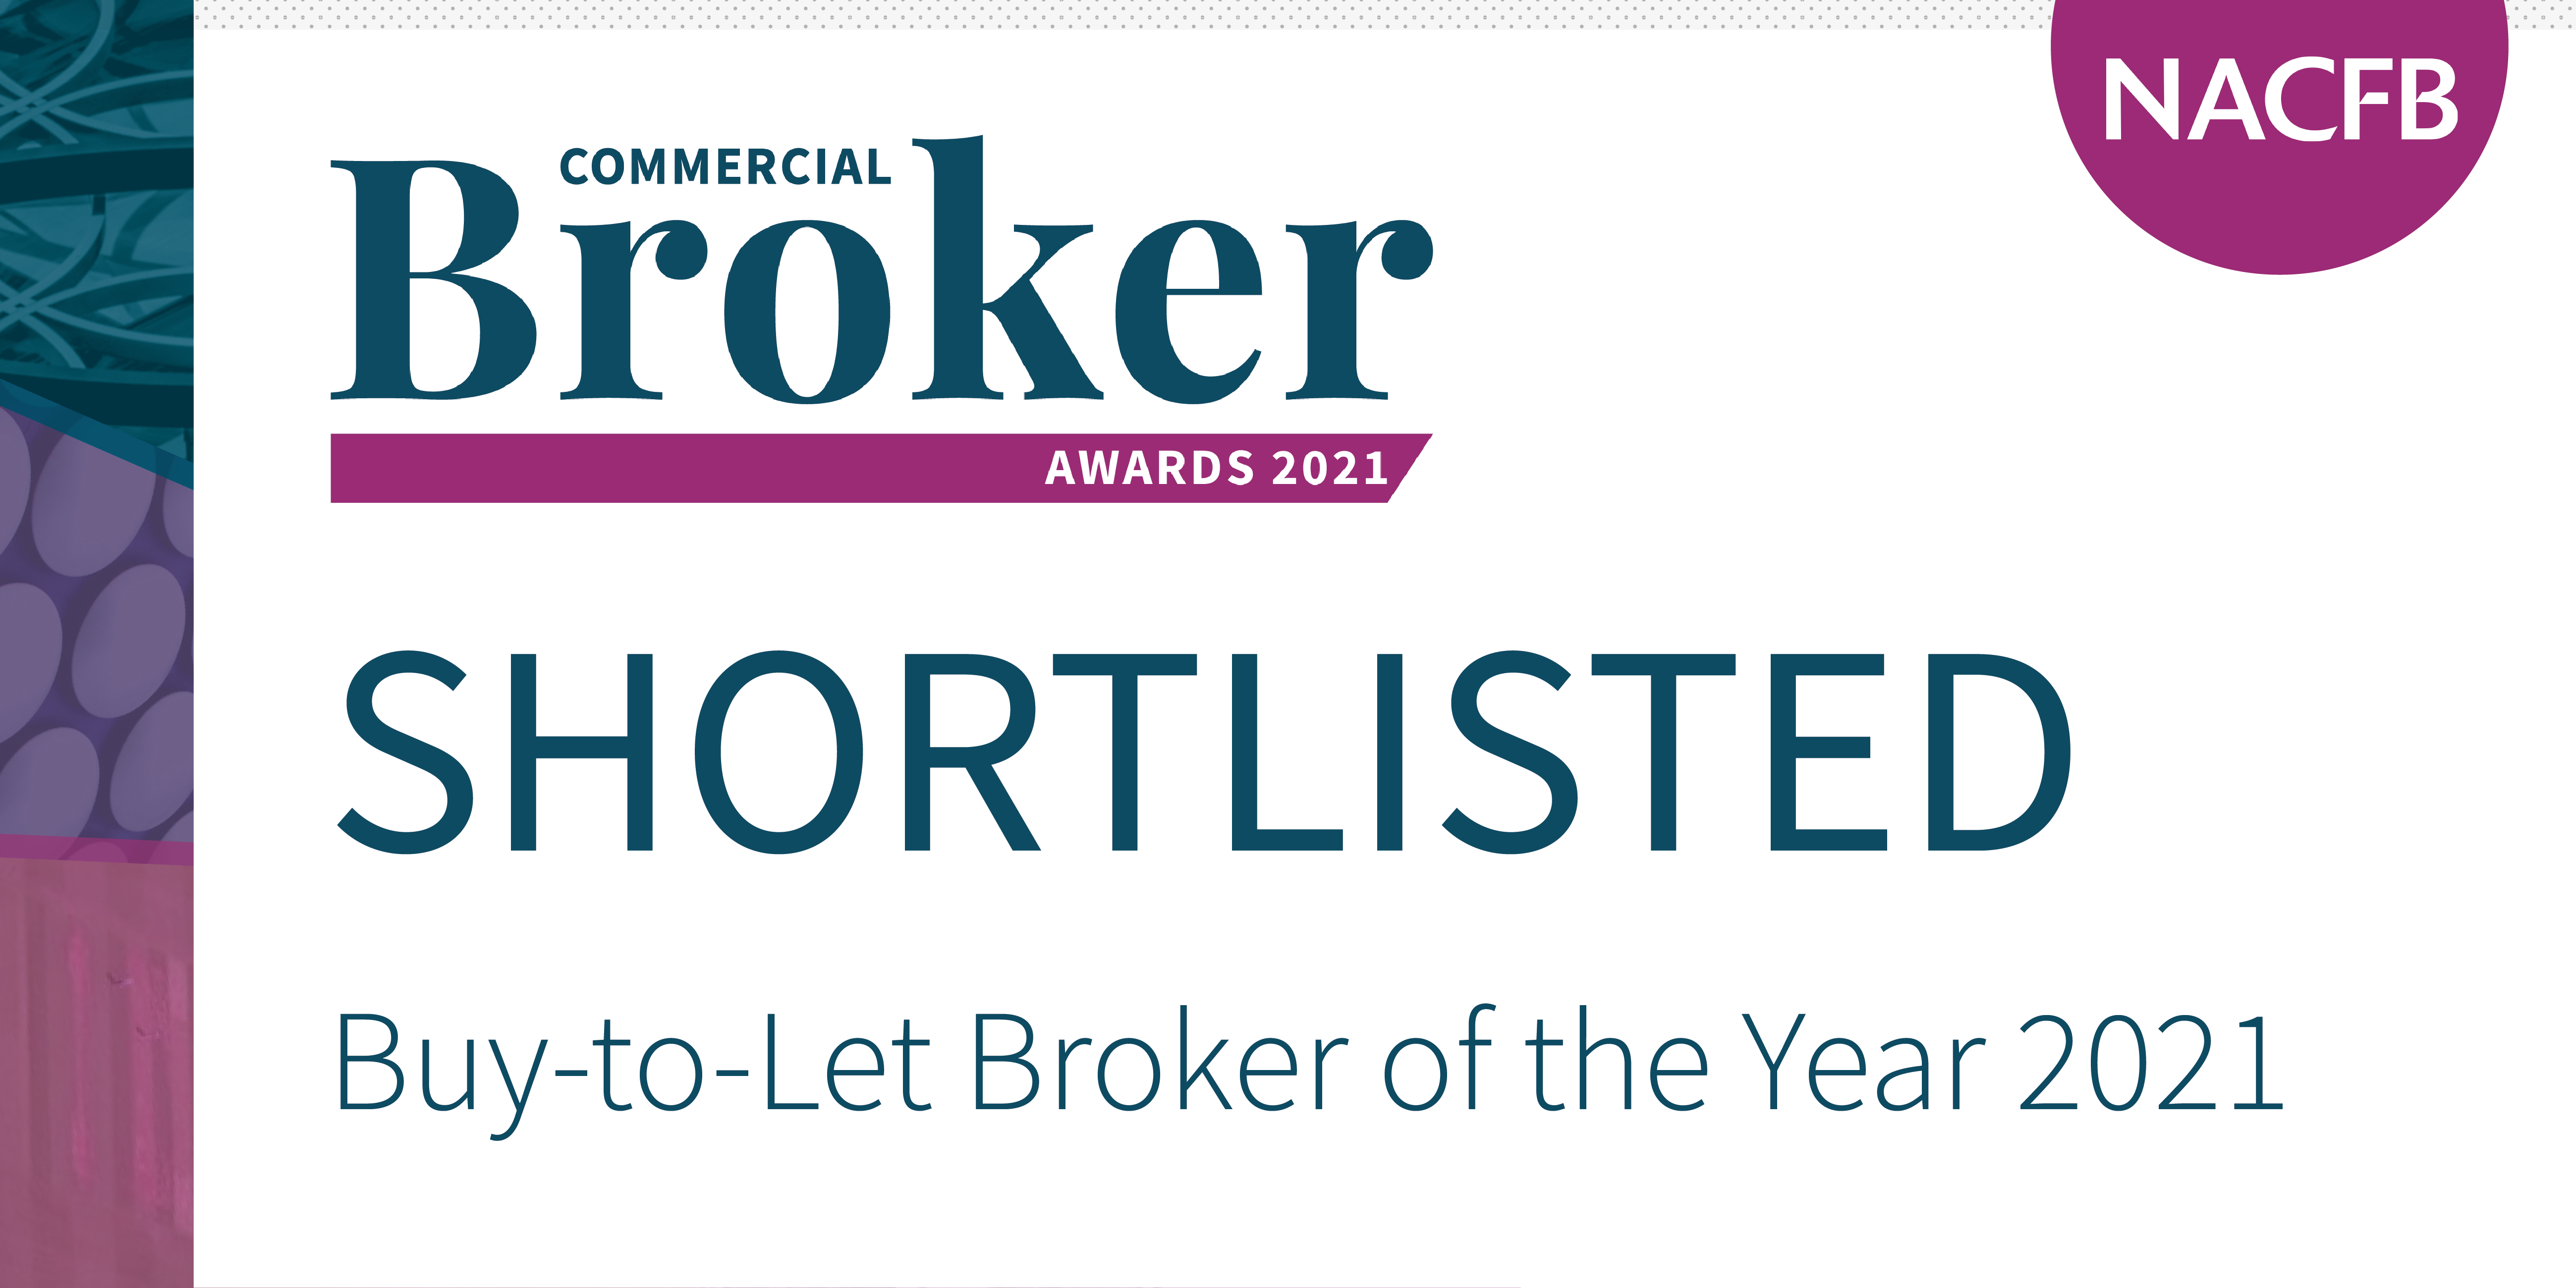 NACFB 2021 Awards Shortlist - Buy-to-Let Broker of the Year